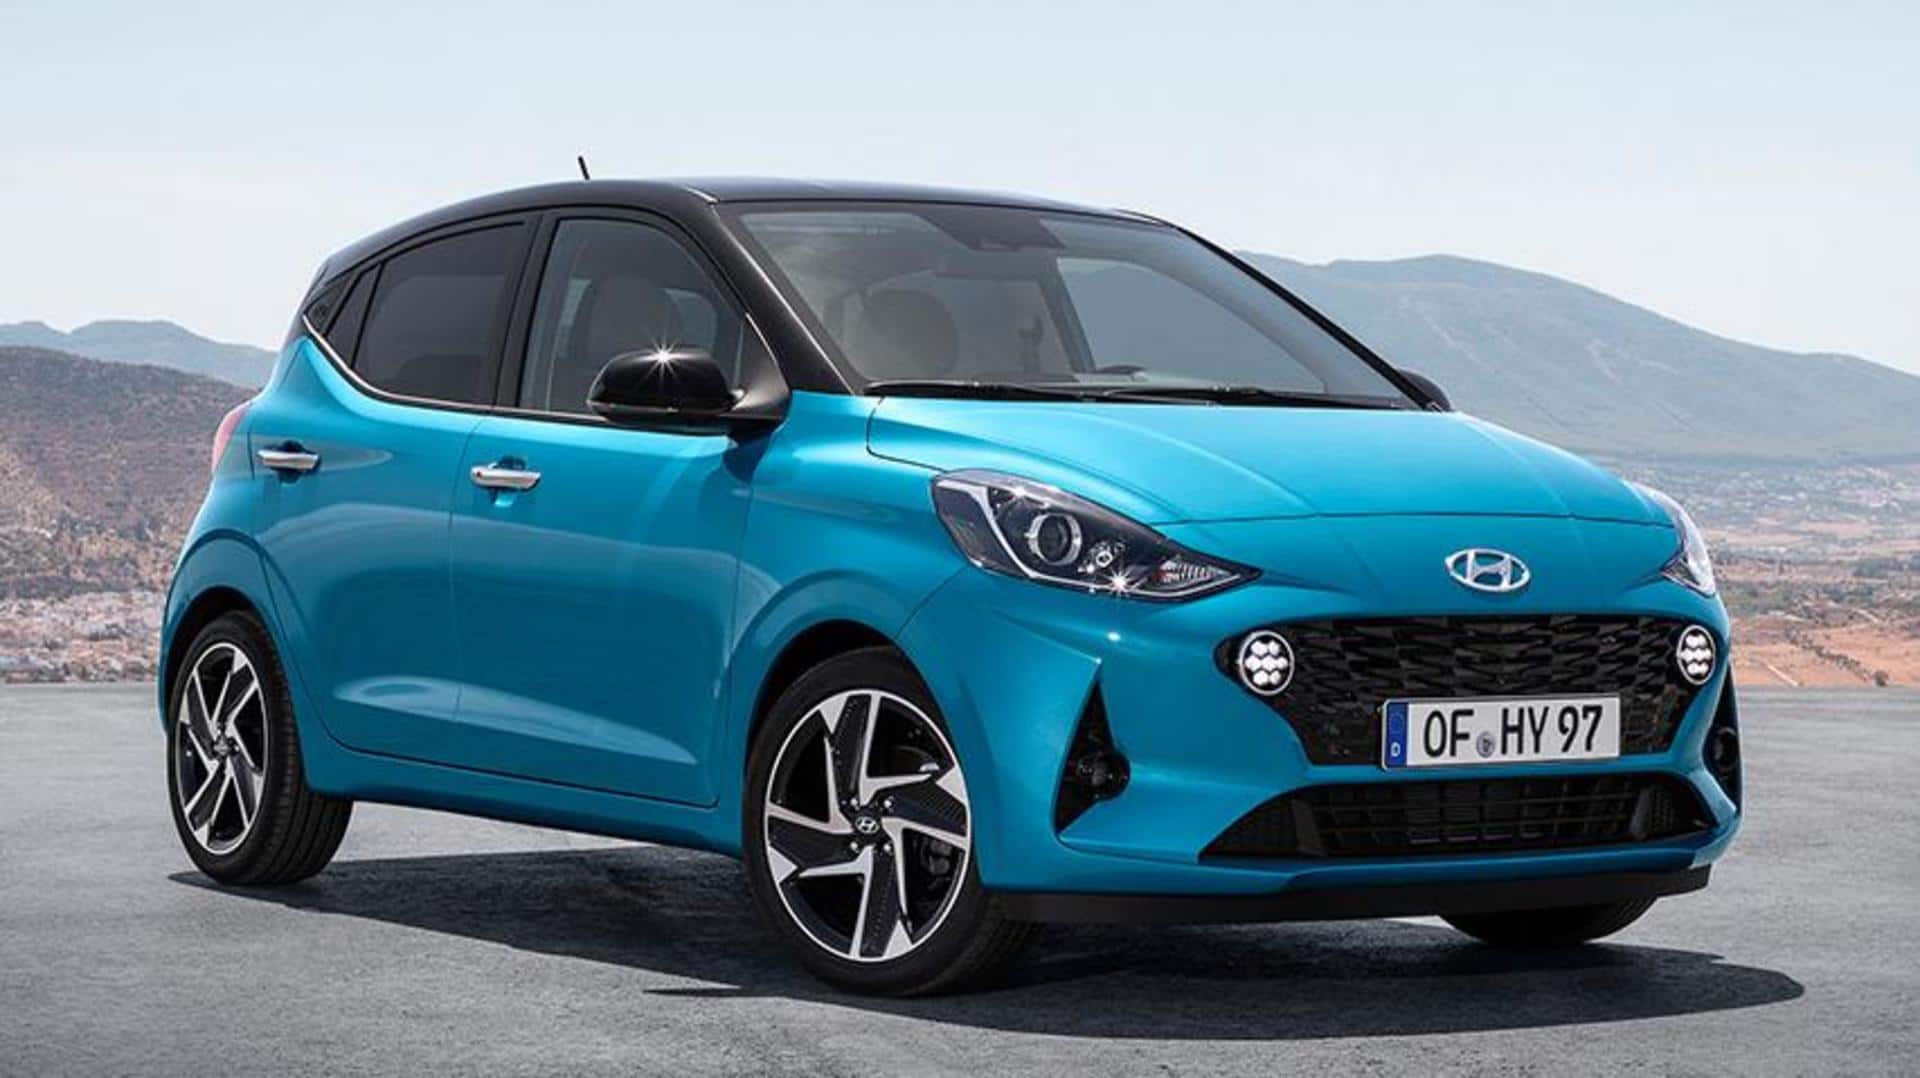 2024 Hyundai i10 hatchback spotted testing What to expect?